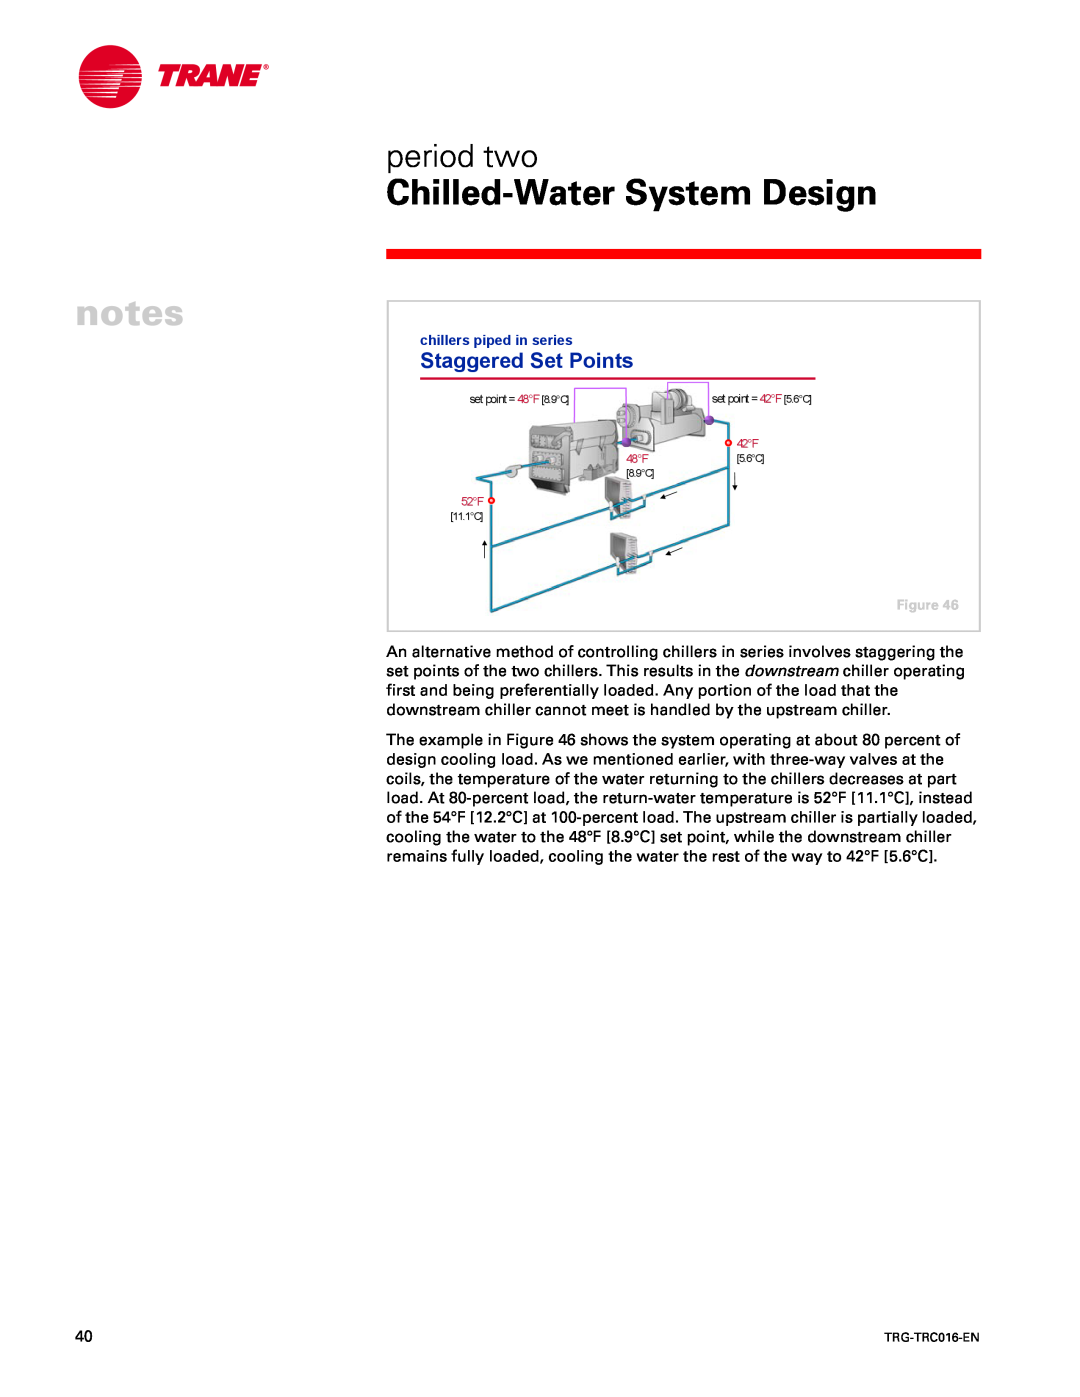 Trane TRG-TRC016-EN manual Staggered Set Points, notes, Chilled-WaterSystem Design, period two, set point =48F8.9C 